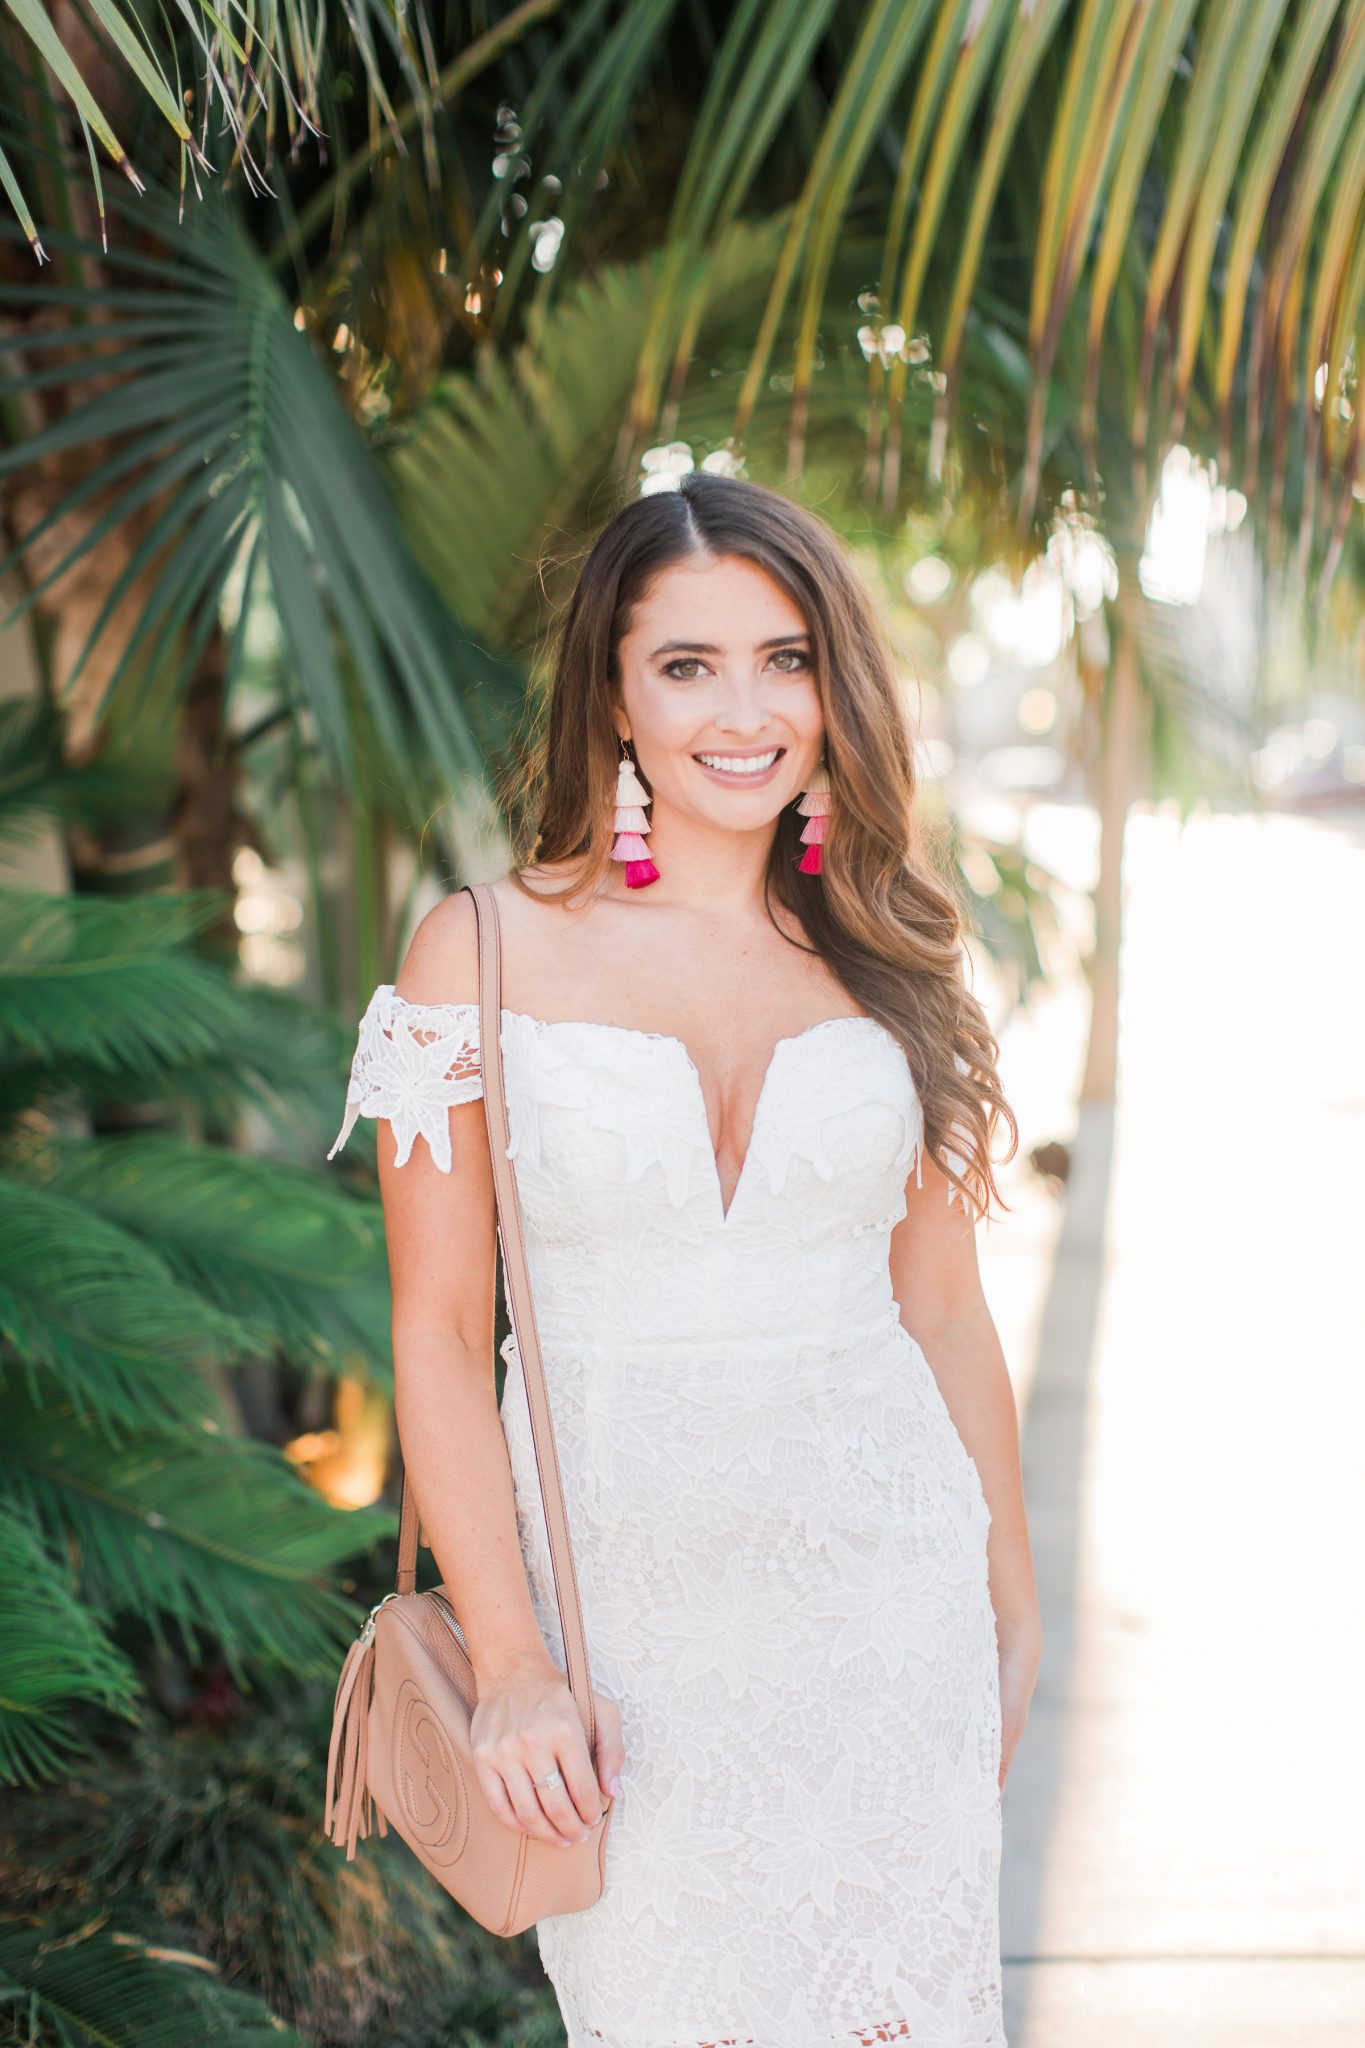 Maxie Elle | Bride-to-be Looks - Wedding Shower Outfit by popular Orange County fashion blogger Maxie Elle